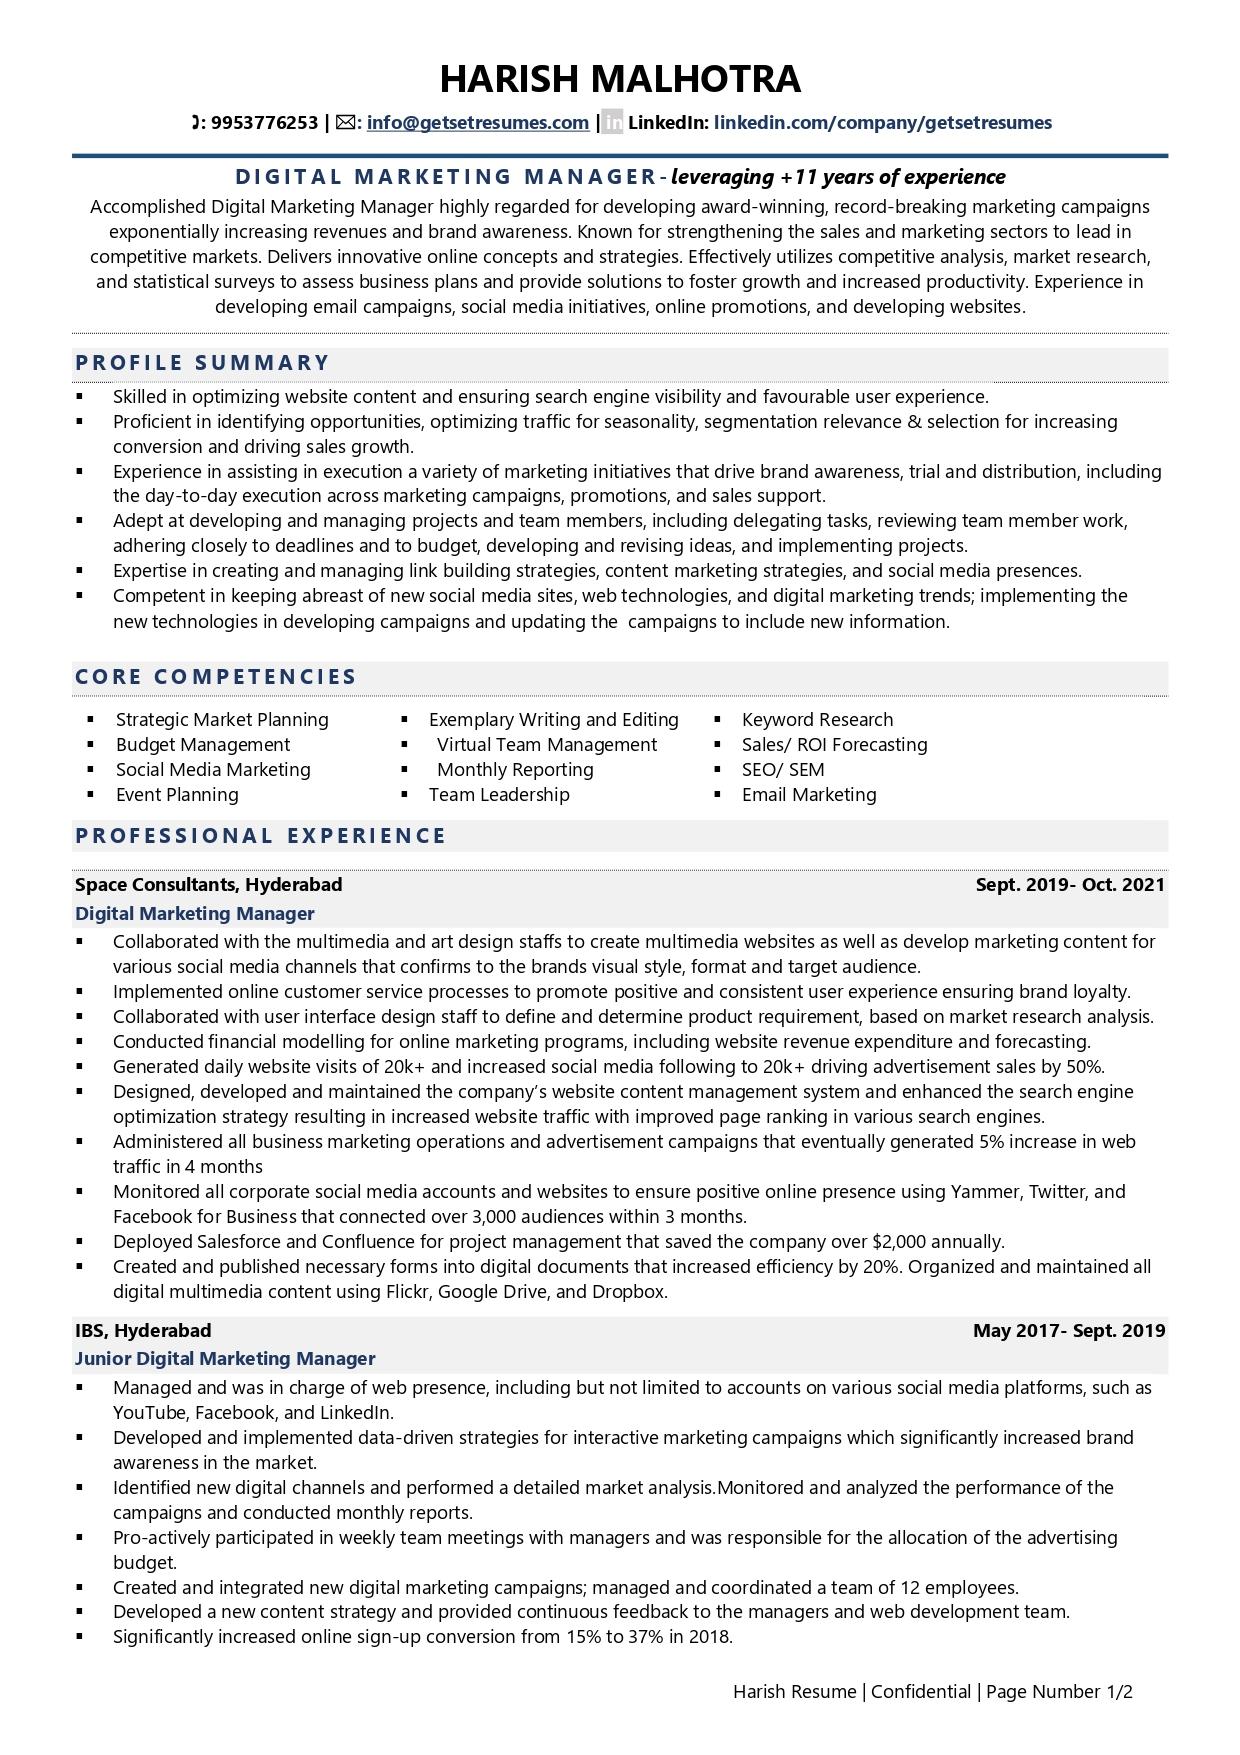 Digital Marketing Manager - Resume Example & Template